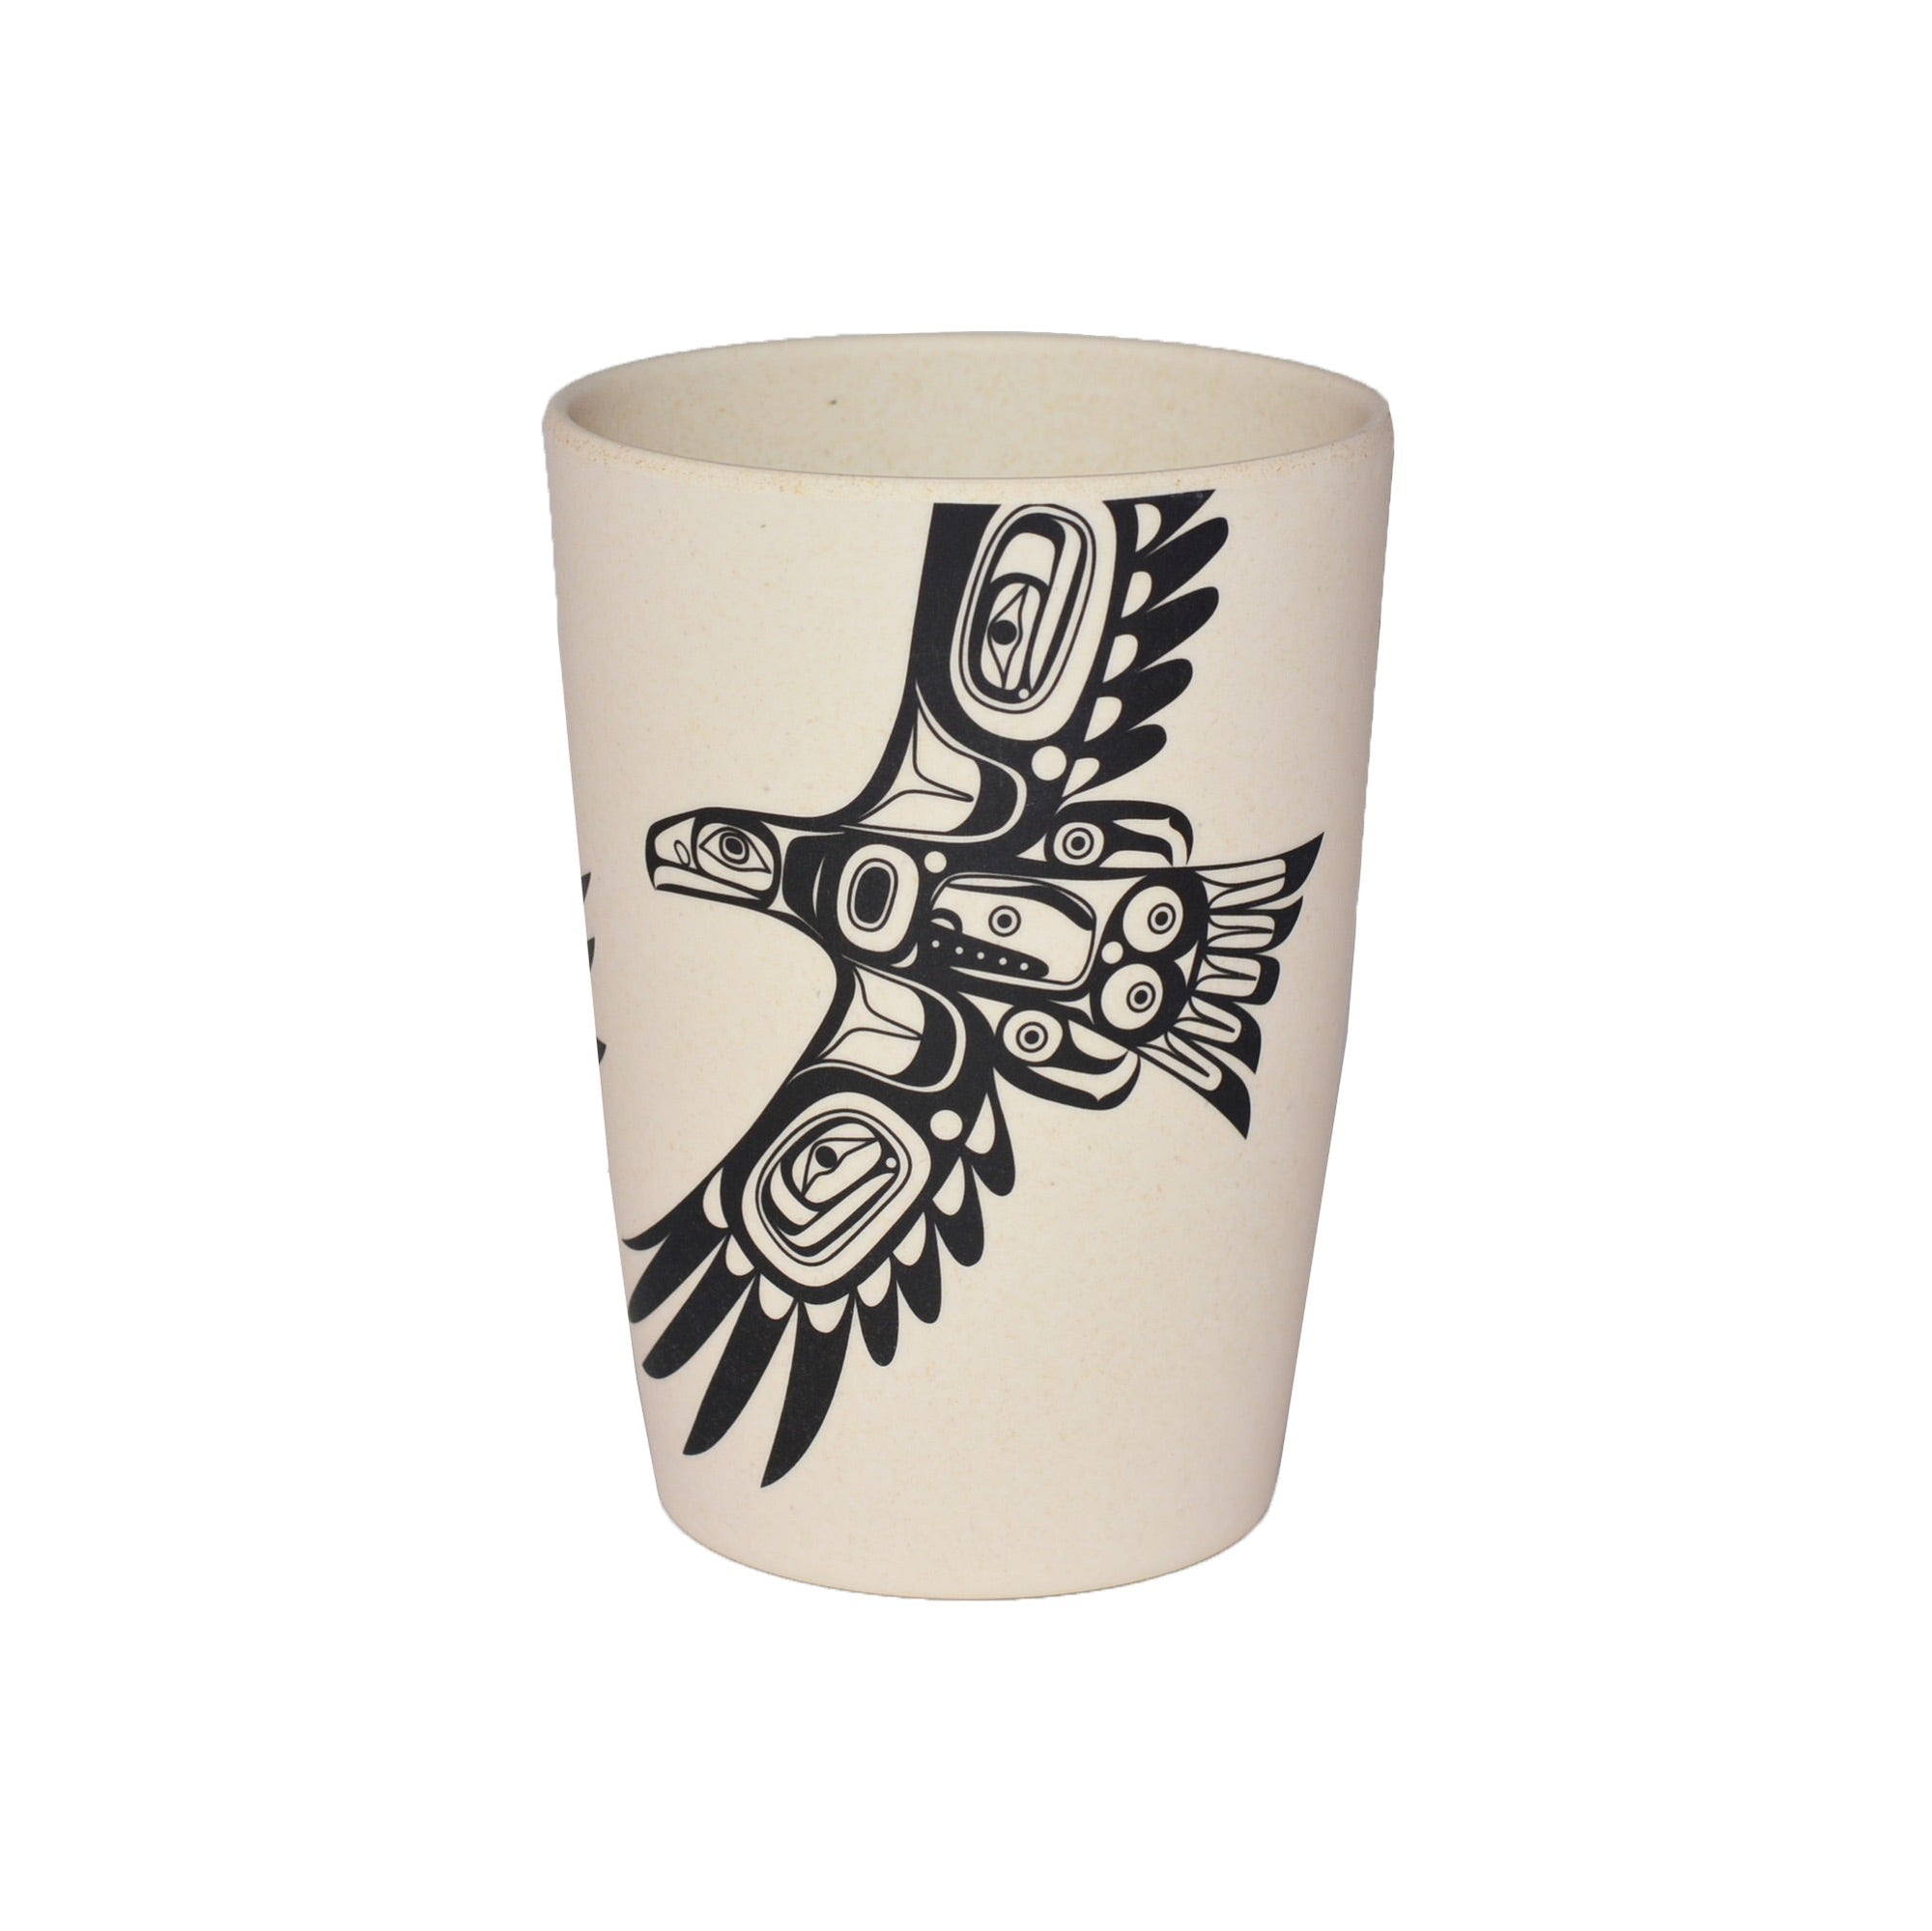 BAMBOO CUPS - Soaring Eagle - BFMBC - House of Himwitsa Native Art Gallery and Gifts